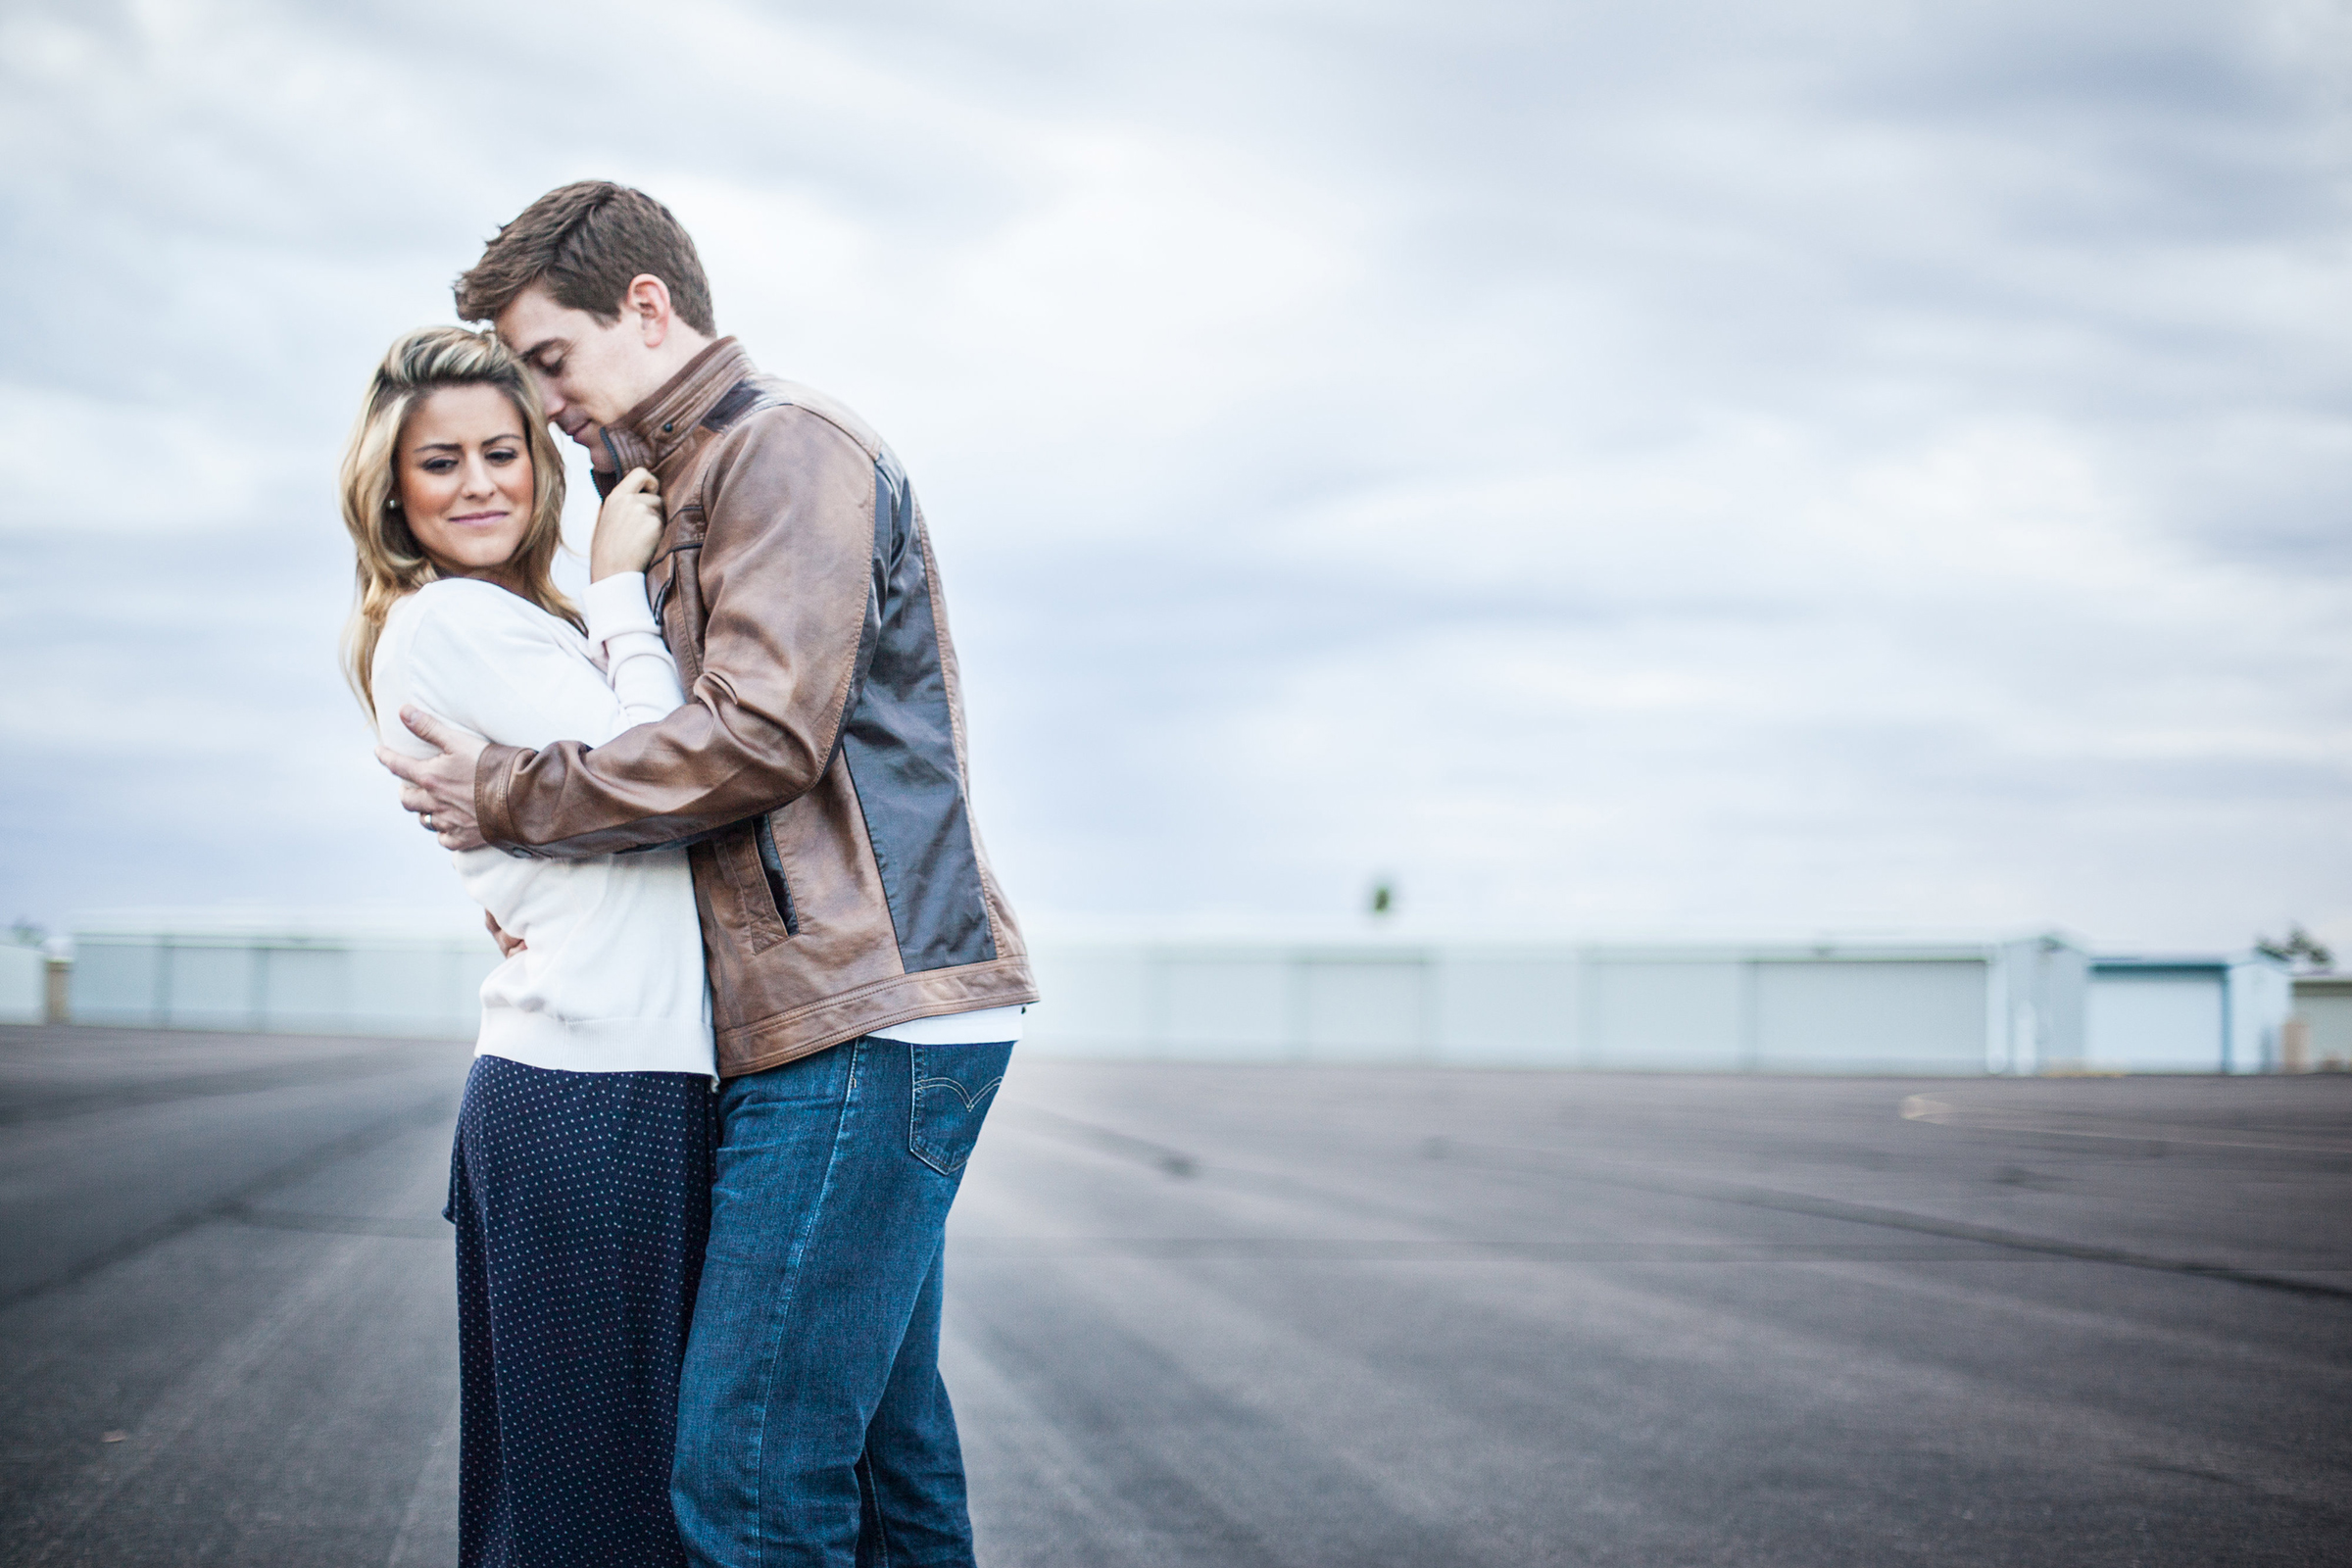 vintage styled couple holding each other in airplane hangar alley